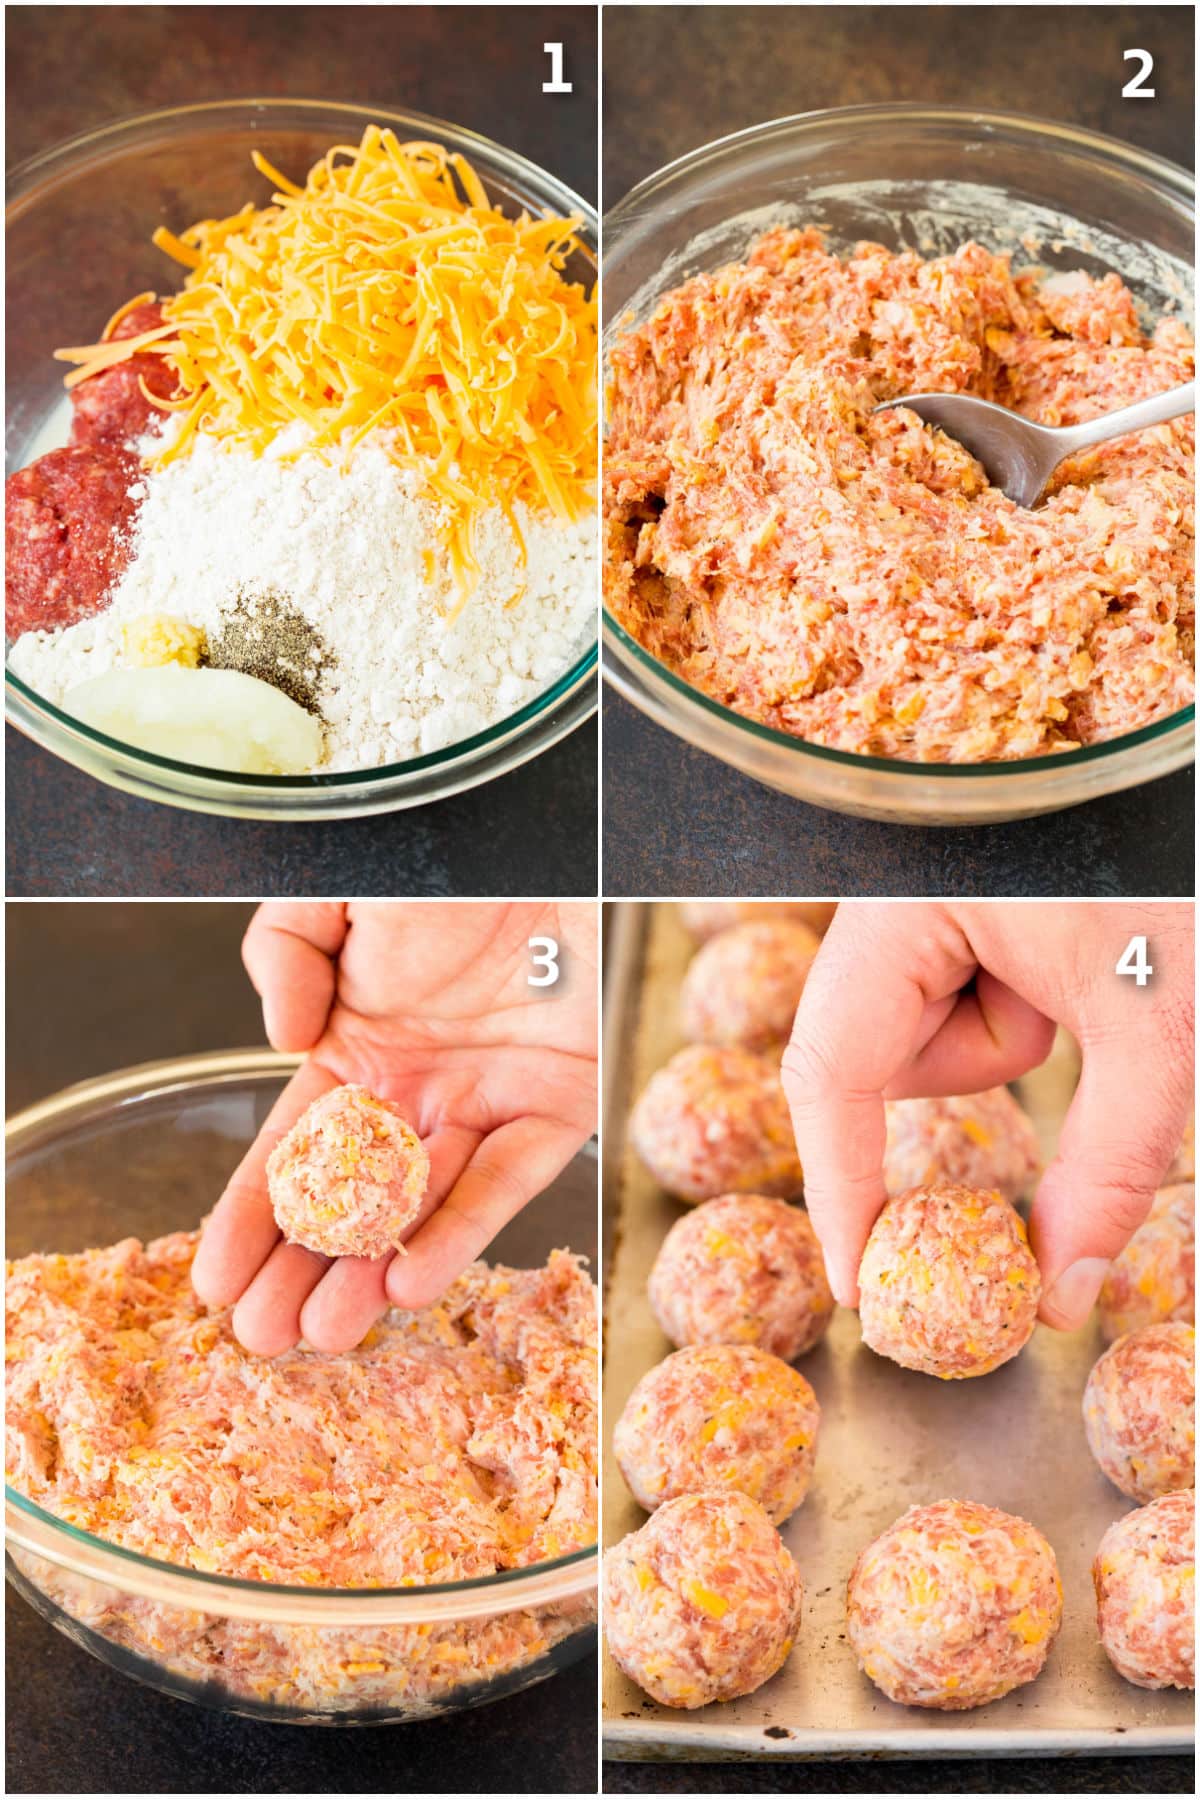 Step by step shots showing how to make a sausage mixture and shape it into round balls.